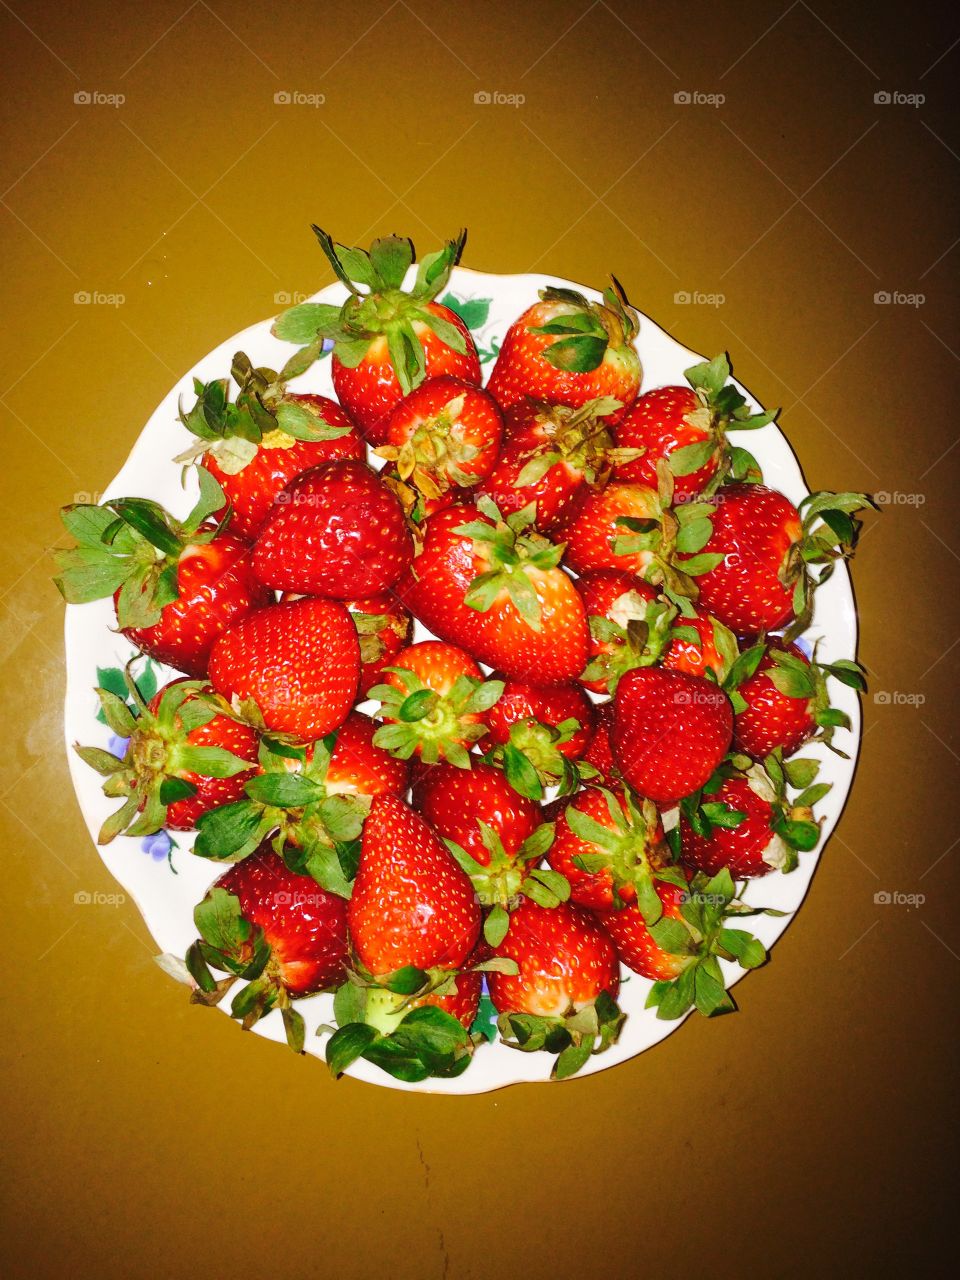 Strawberry is as heart is useful for the heart
#healthyfood #foap